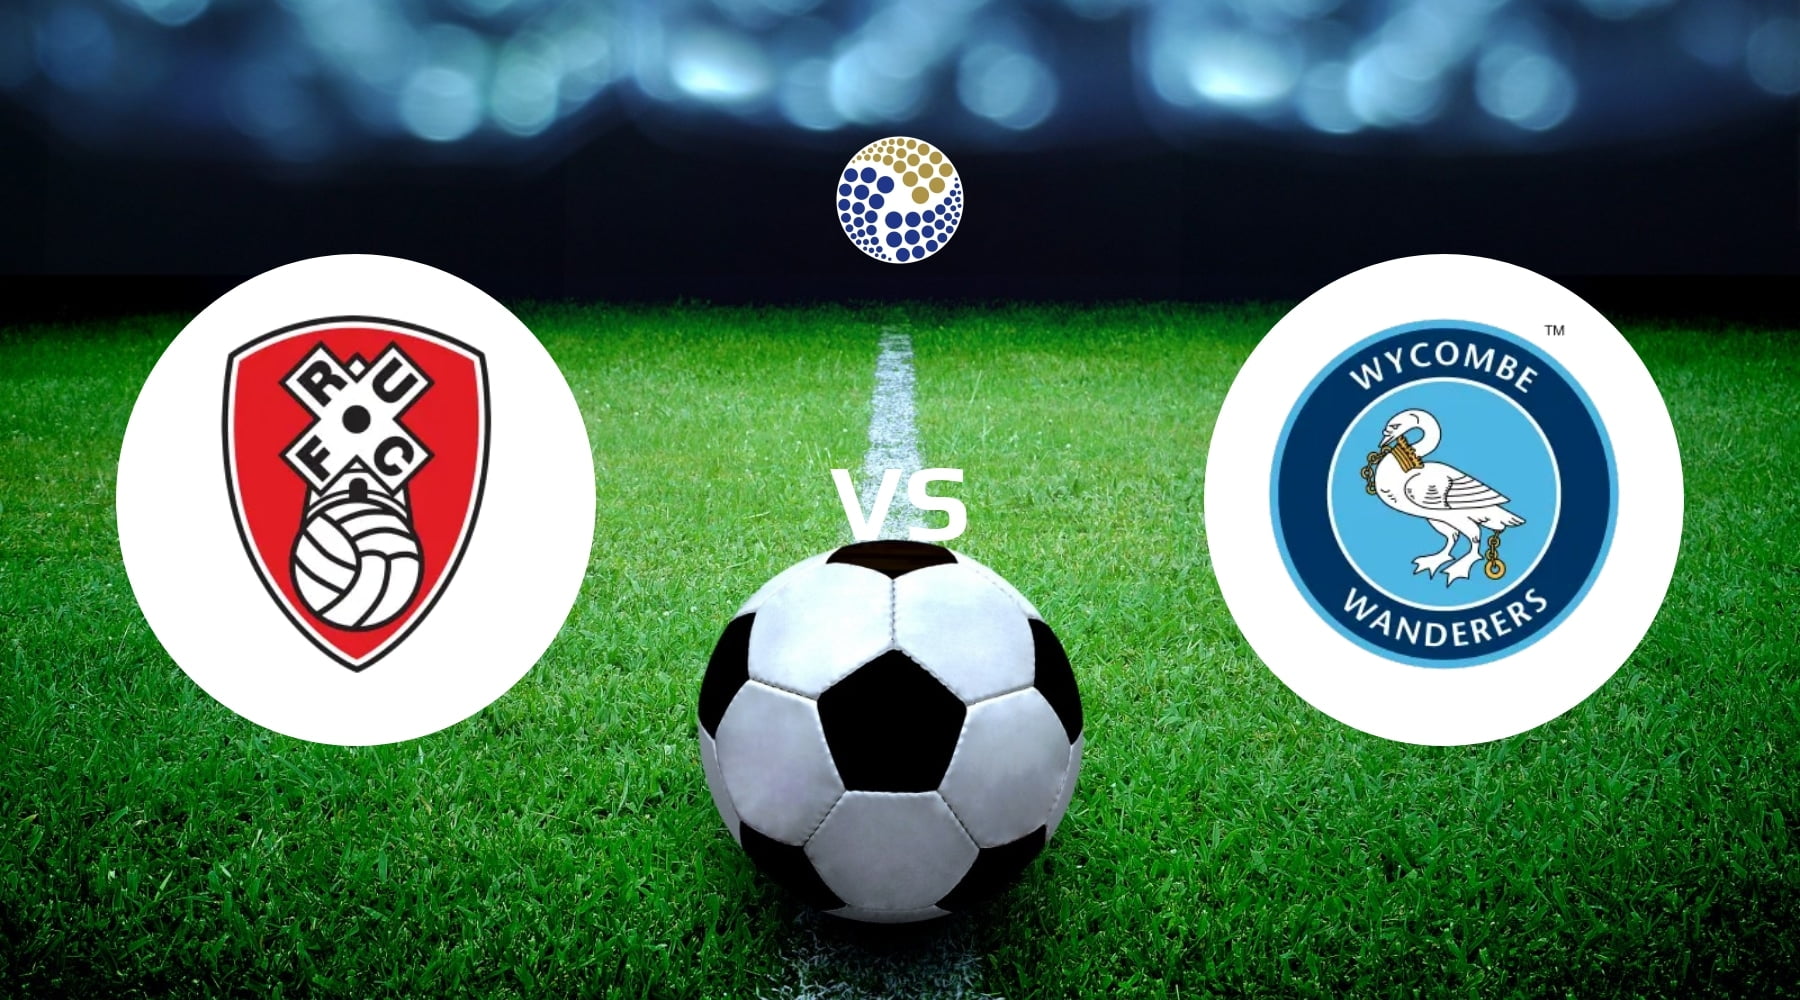 Rotherham United vs Wycombe Wanderers Betting Tips & Prediction